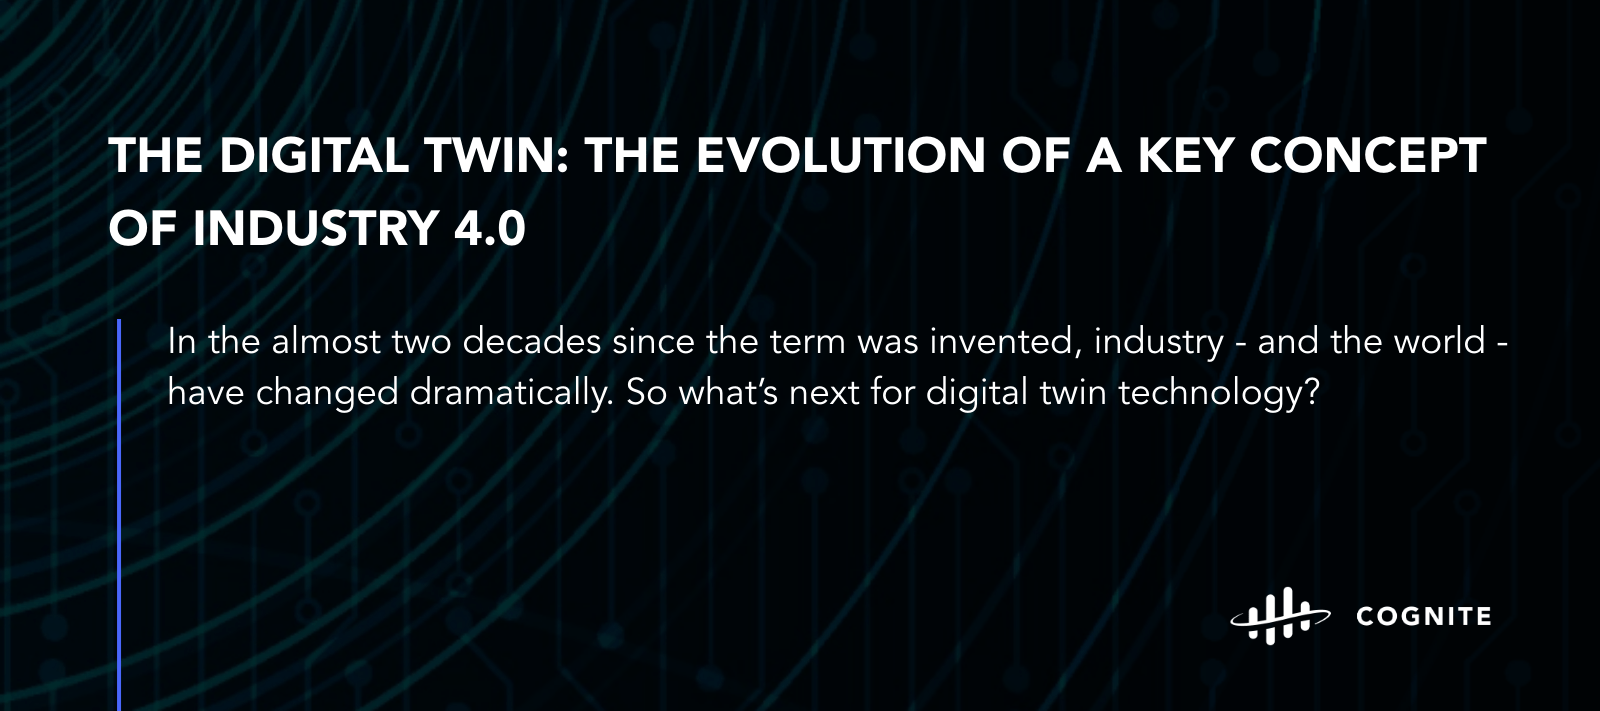 The digital twin: the evolution of a key concept of industry 4.0